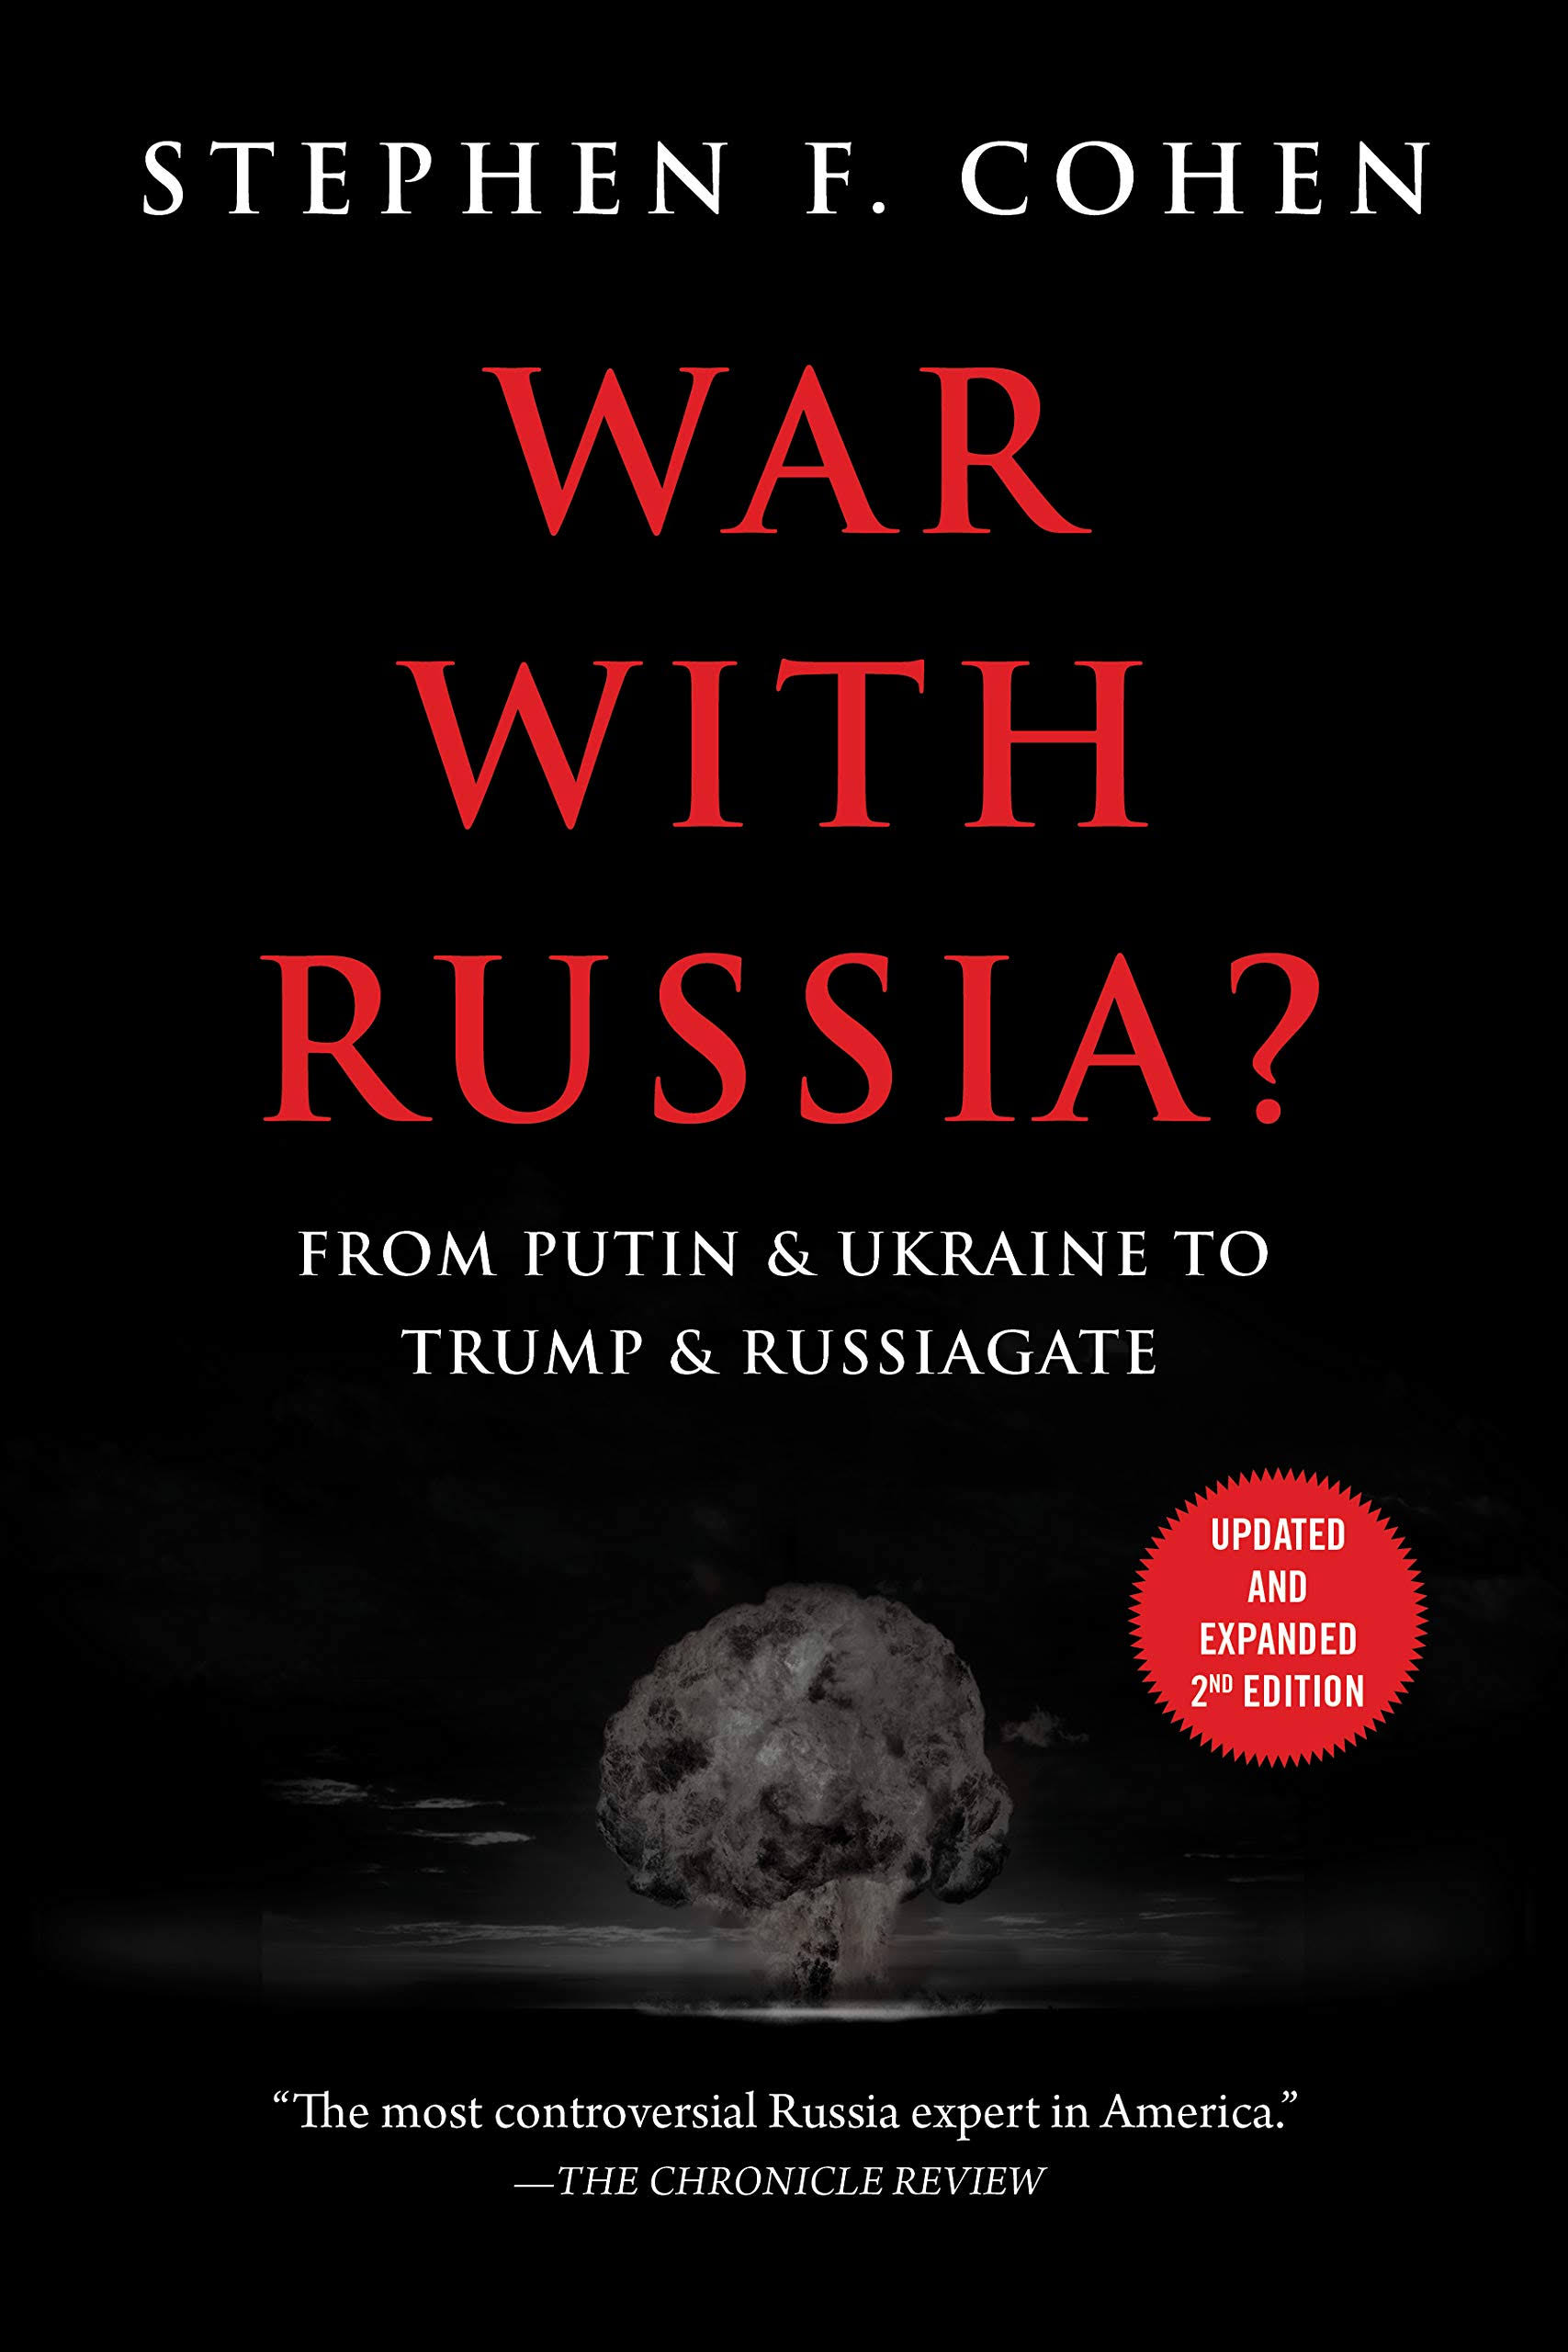 War With Russia? by Stephen F. Cohen